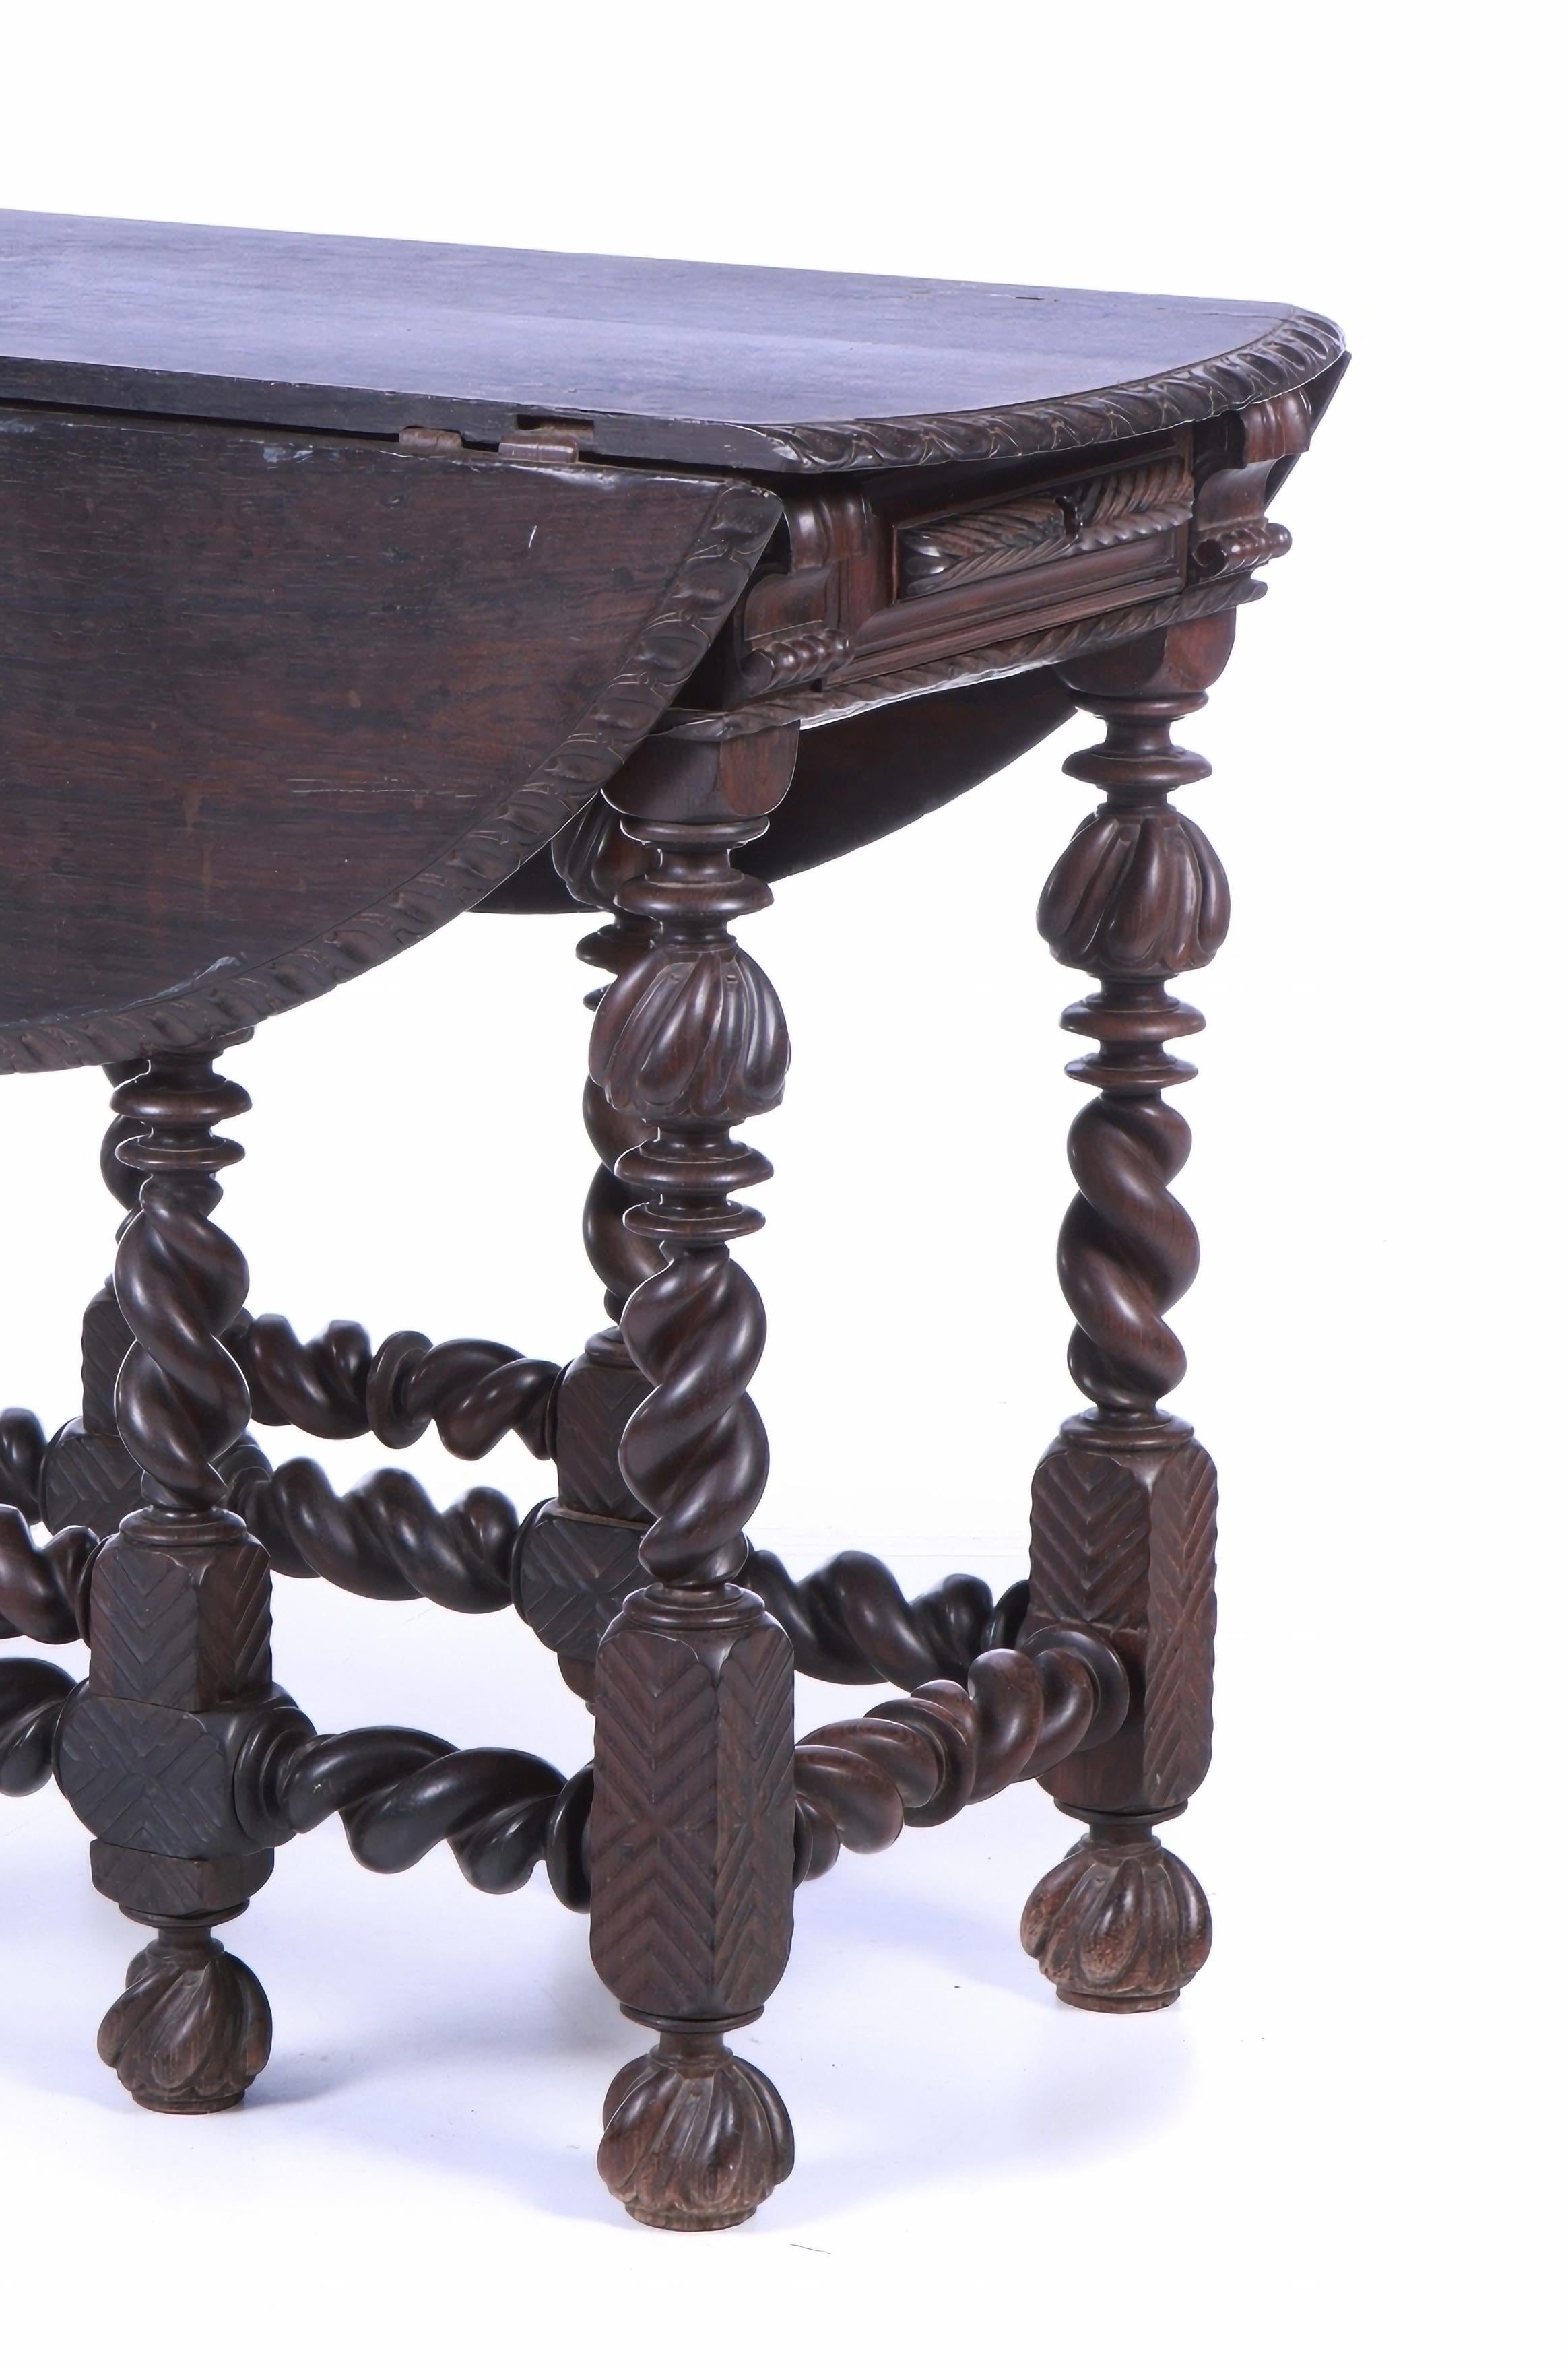 Hand-Crafted Portuguese Tab Table from the 17th Century